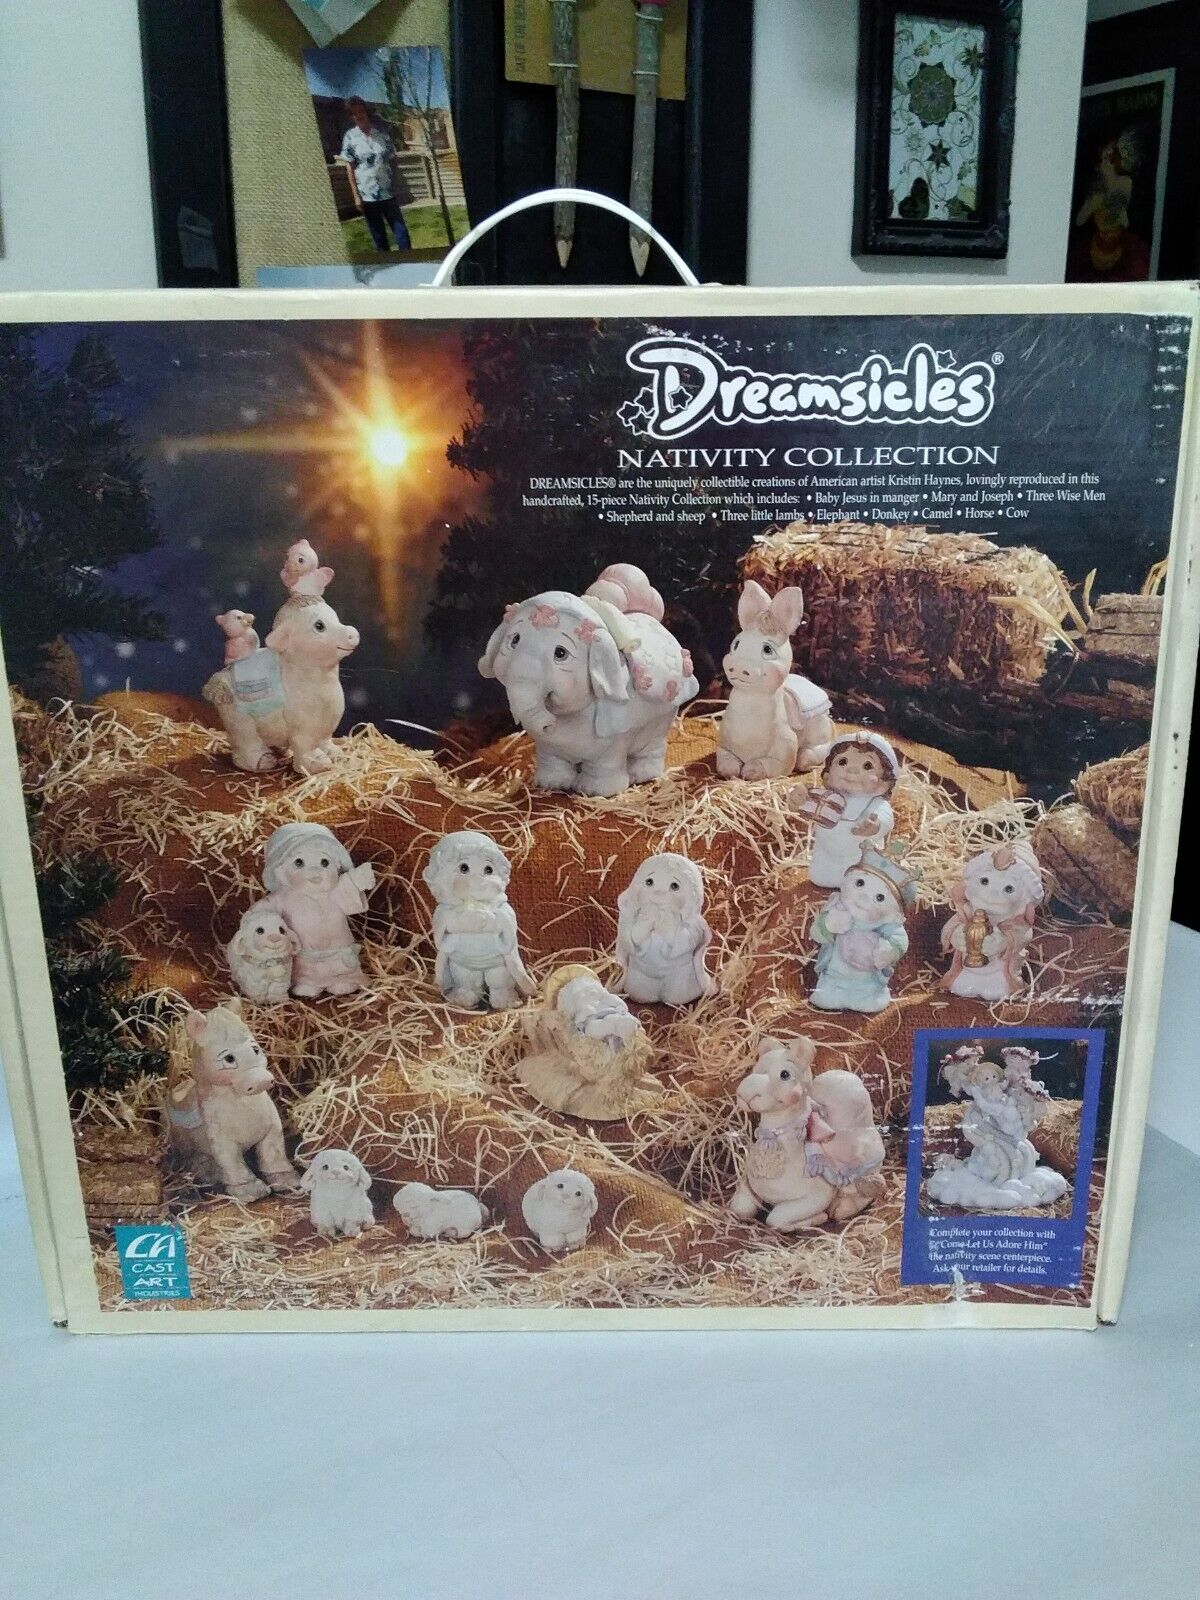 15 PC DREAMSICLES NATIVITY COLLECTION EXCELLENT CONDITION STILL IN PLASTIC $32